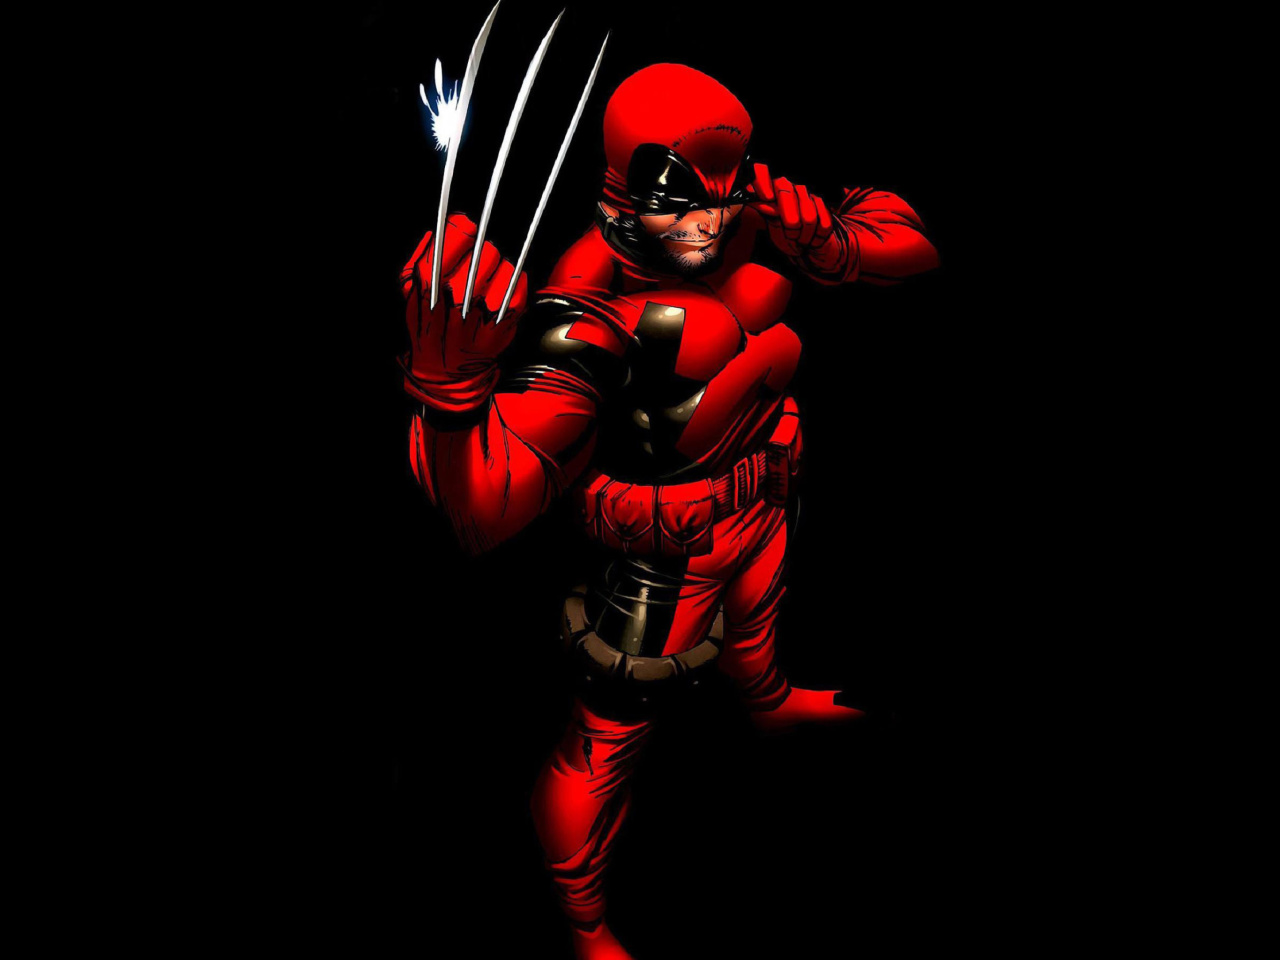 Wolverine in Red Costume wallpaper 1280x960